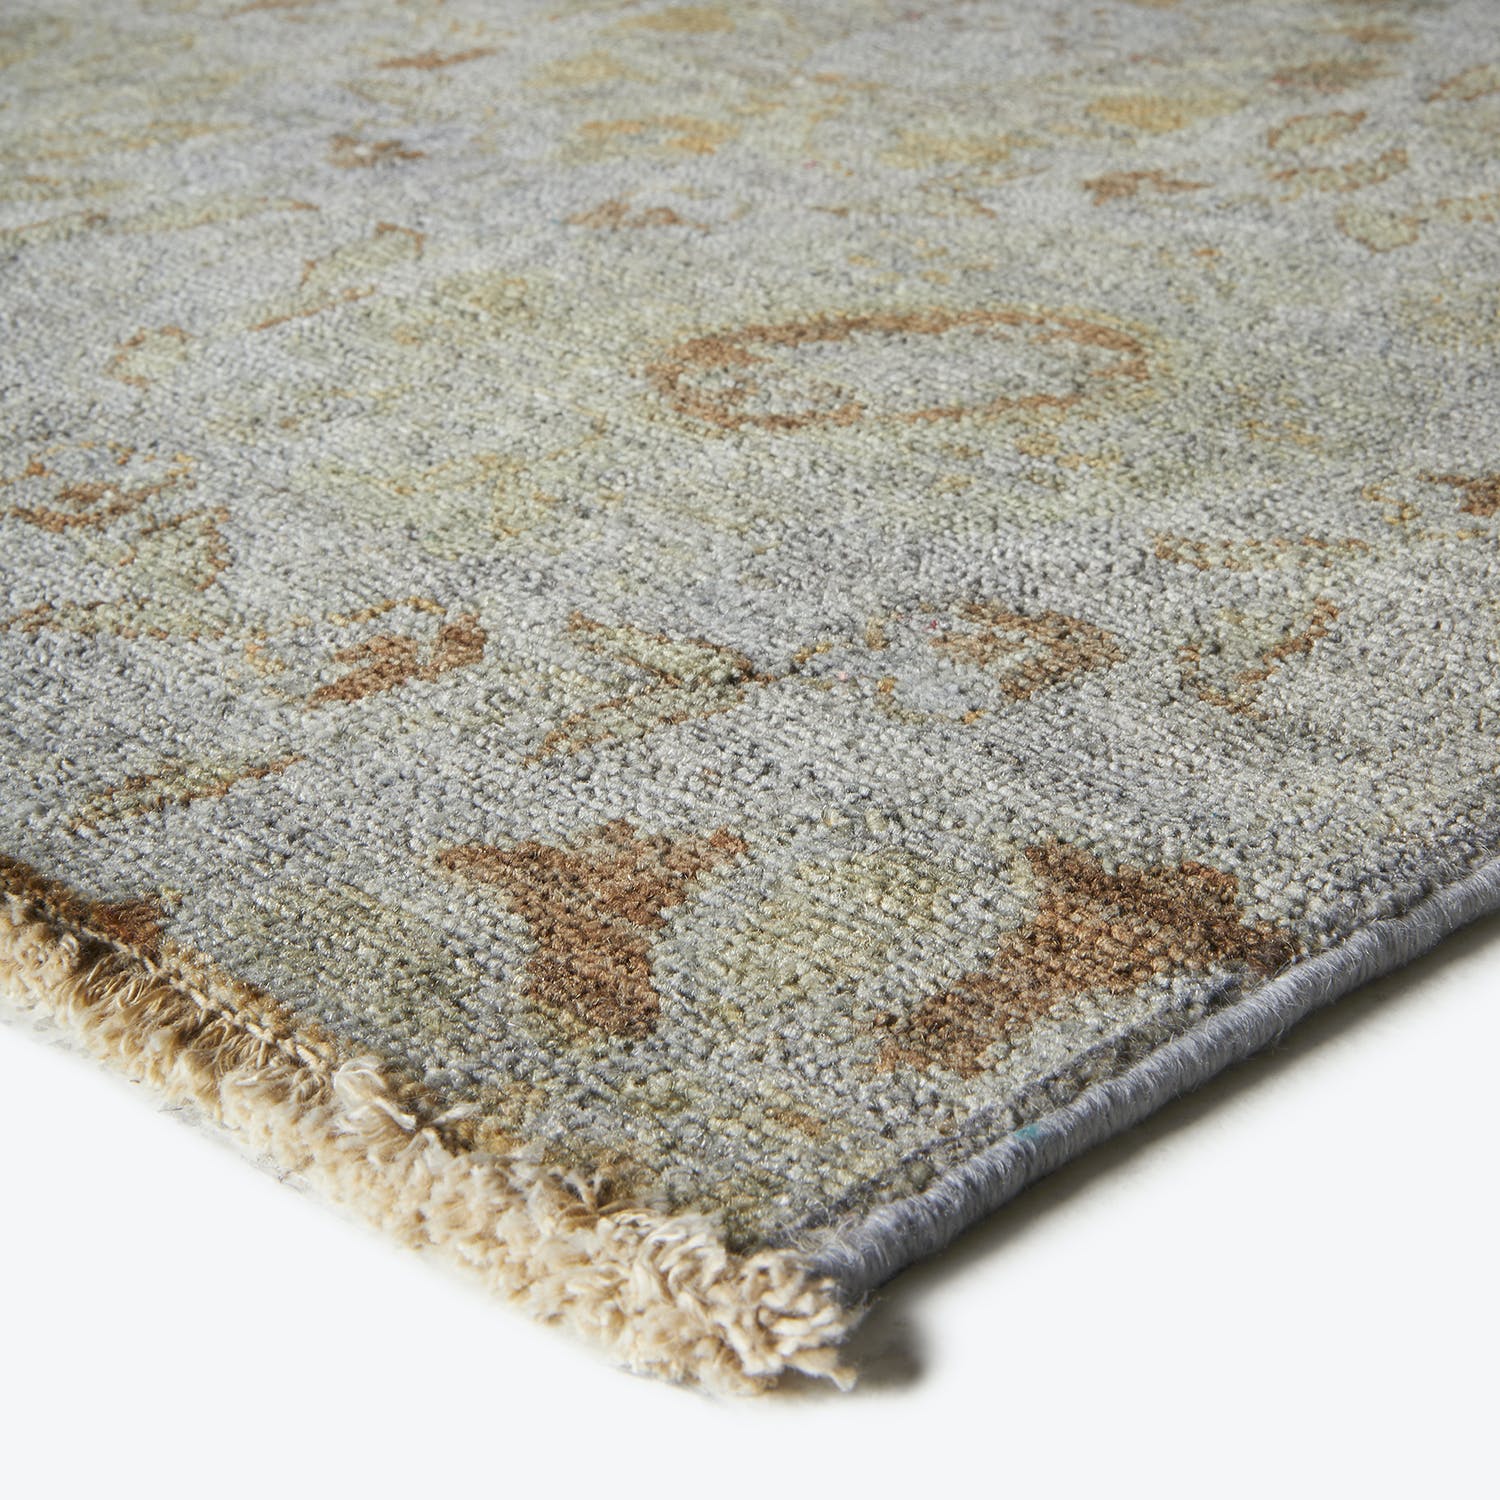 Close-up view of a textured rug with cool grey tones.